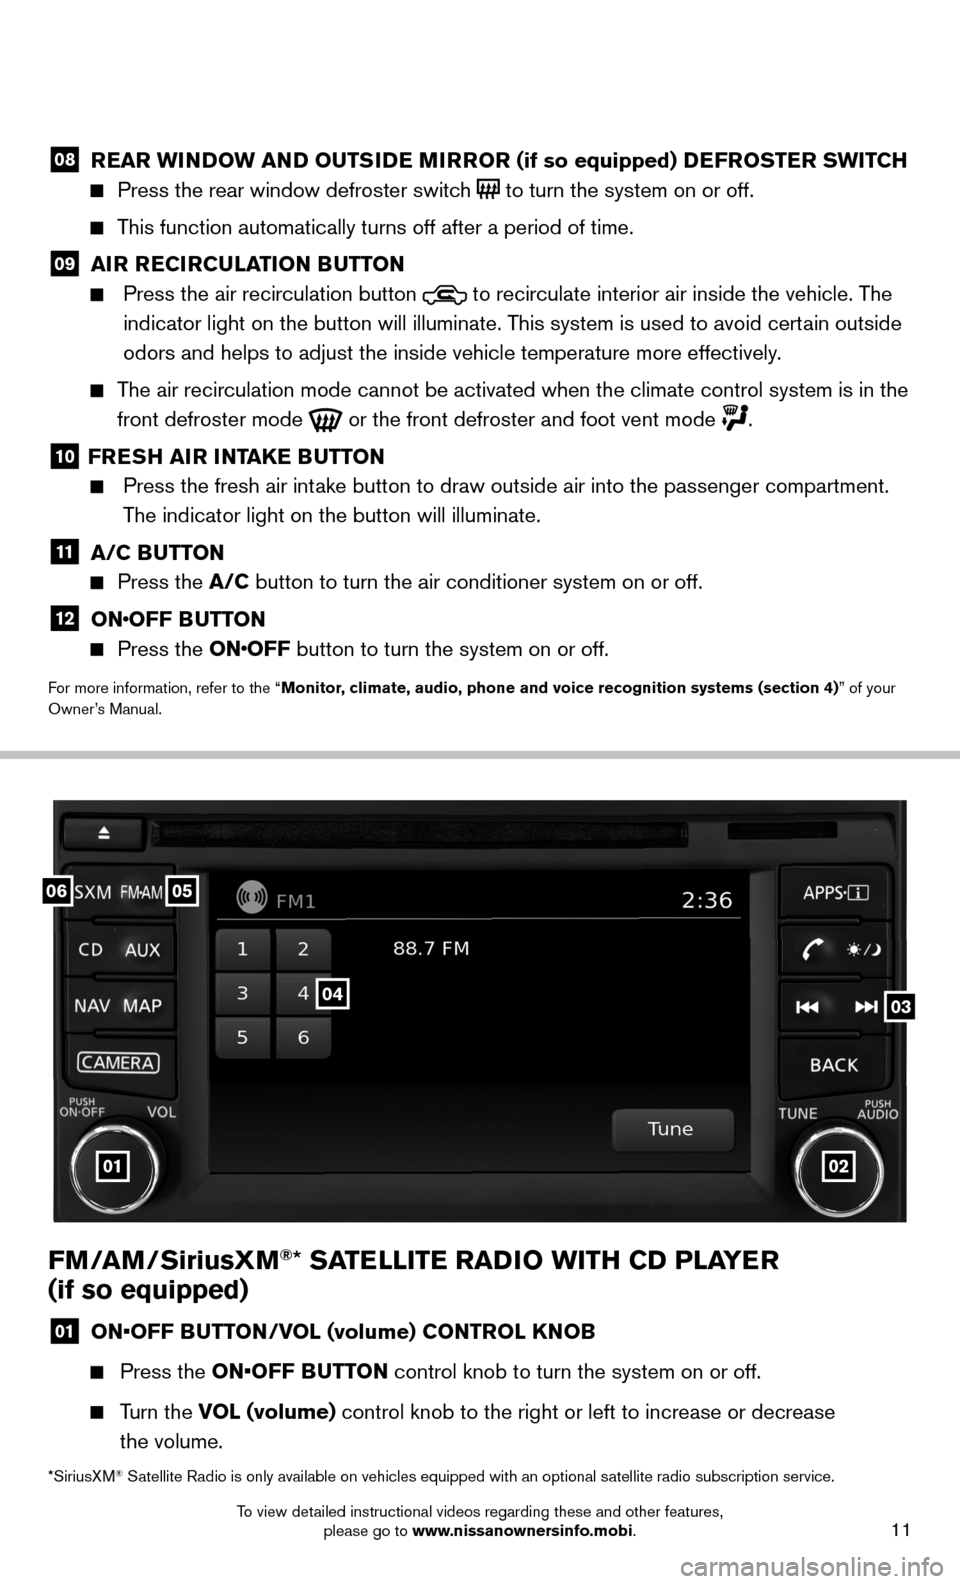 NISSAN SENTRA 2014 B17 / 7.G Quick Reference Guide 11
FM/AM/SiriusXM®* SATELLITE RADIO WITH CD PLAYER  
(if so equipped)
01  ON•OFF BUTTON/VOL (volume) CONTROL KNOB
 
  Press the ON•OFF BUTTON control knob to turn the system on or off. 
 
   Turn